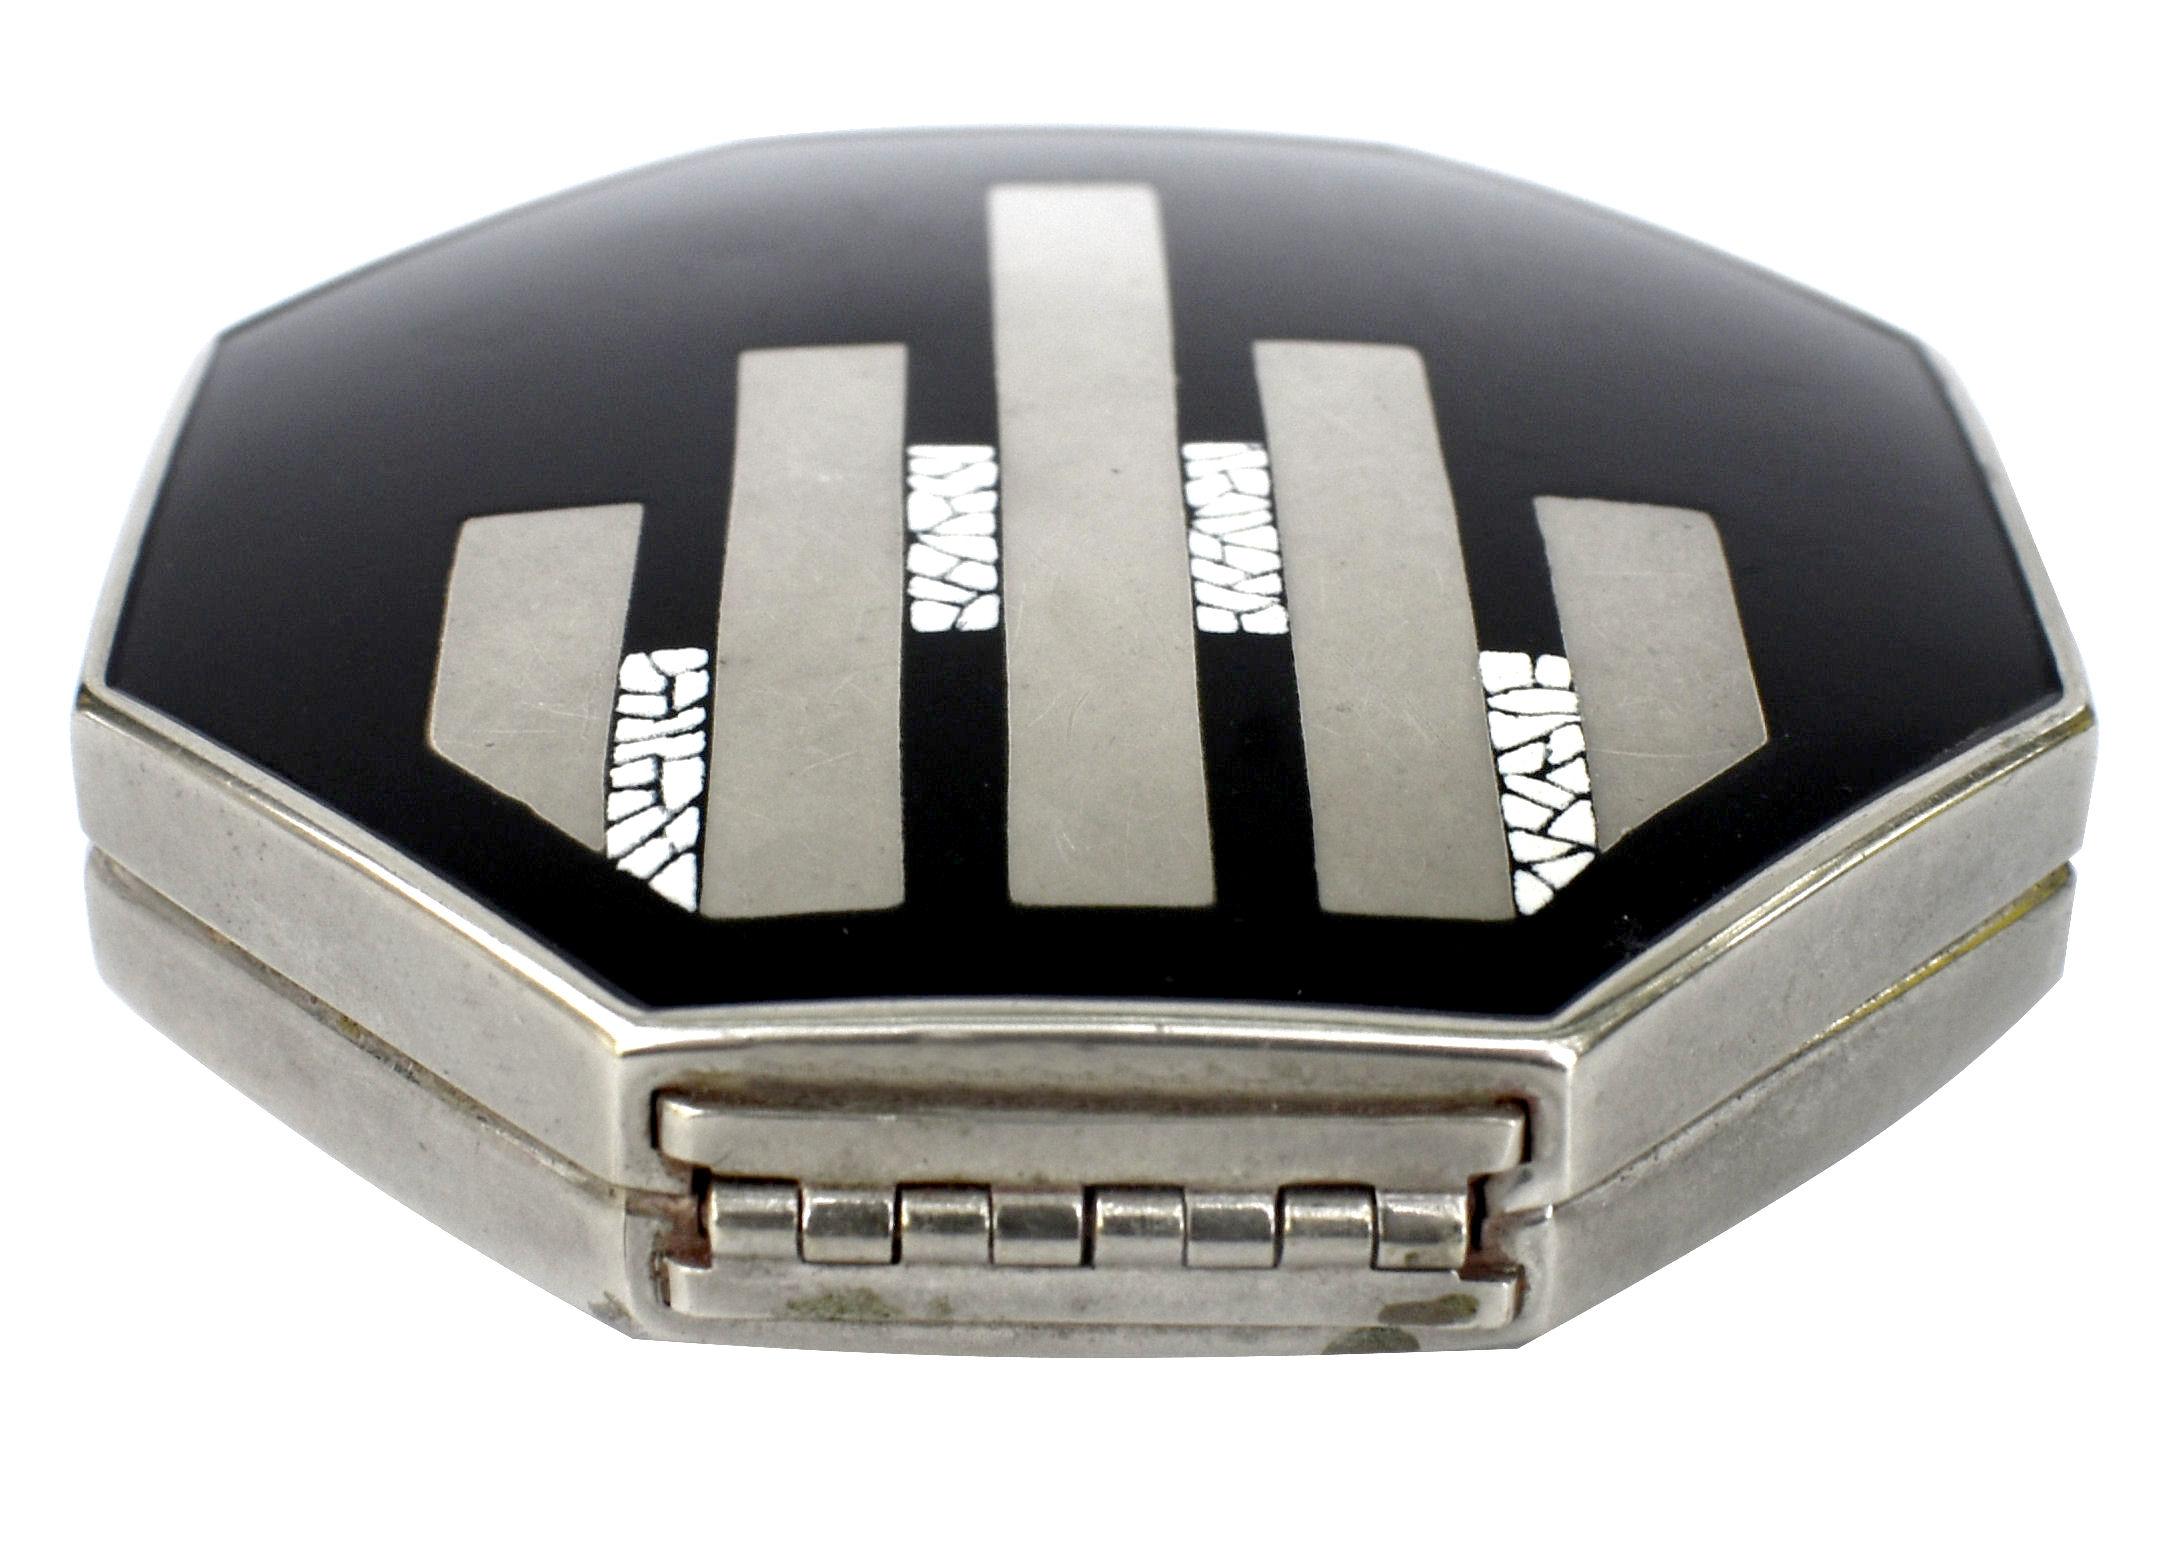 Original Art Deco Black and chrome enameled ladies powder compact. Produced by Elizabeth Arden sometime in the late 1920's - 1930's. Inside the compact it is marked Ardenette. The compact is hexagon in shape. The lid is black enamel with silver and